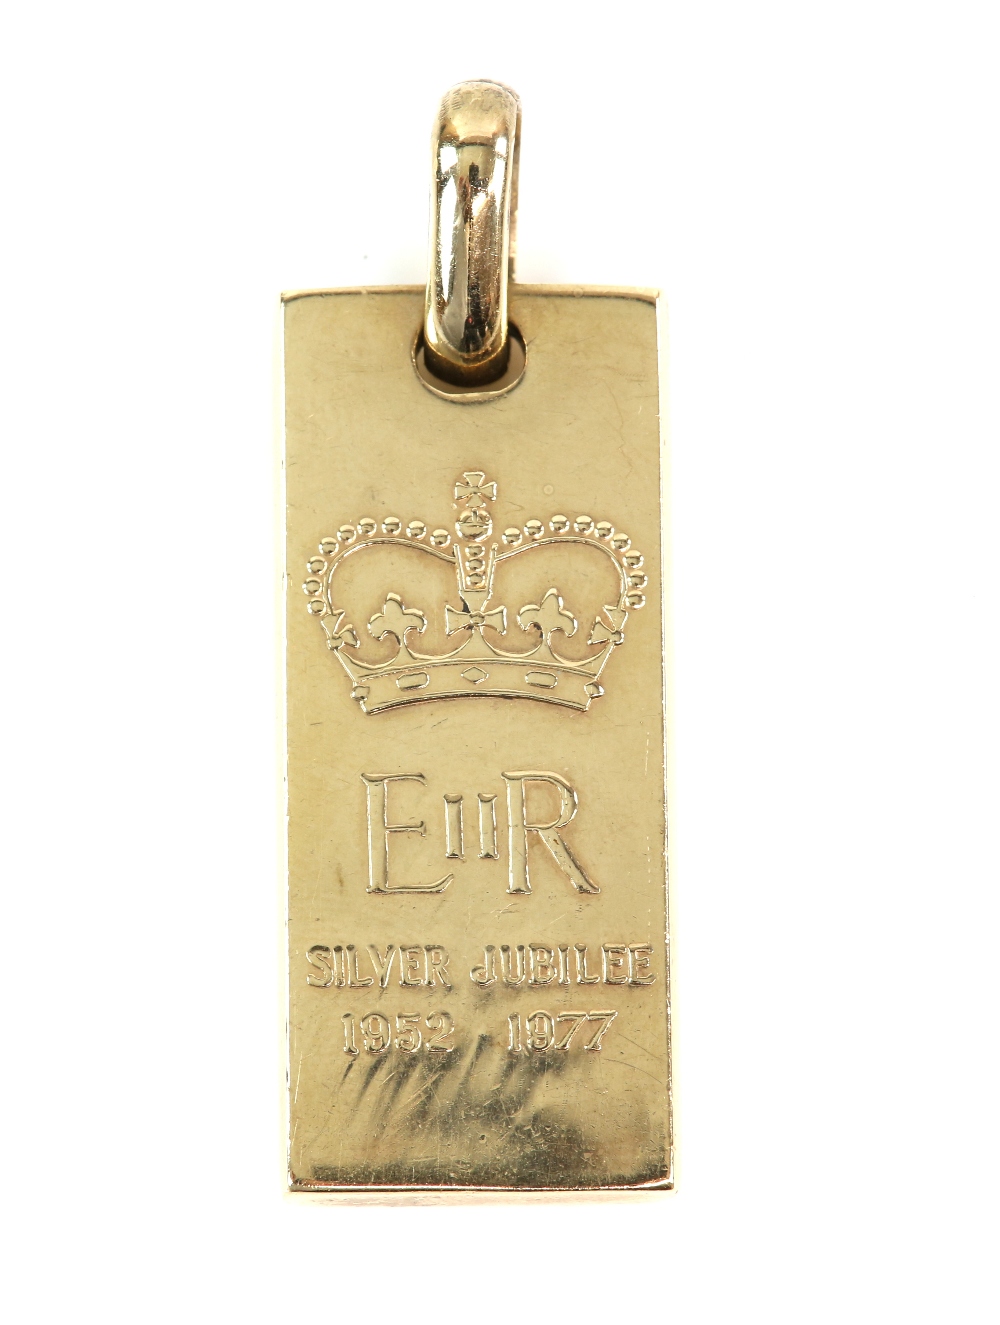 Gold ingot pendant, commemorating the silver jubilee 1952-1977, in 9 ct hallmarked London 1977, - Image 2 of 4